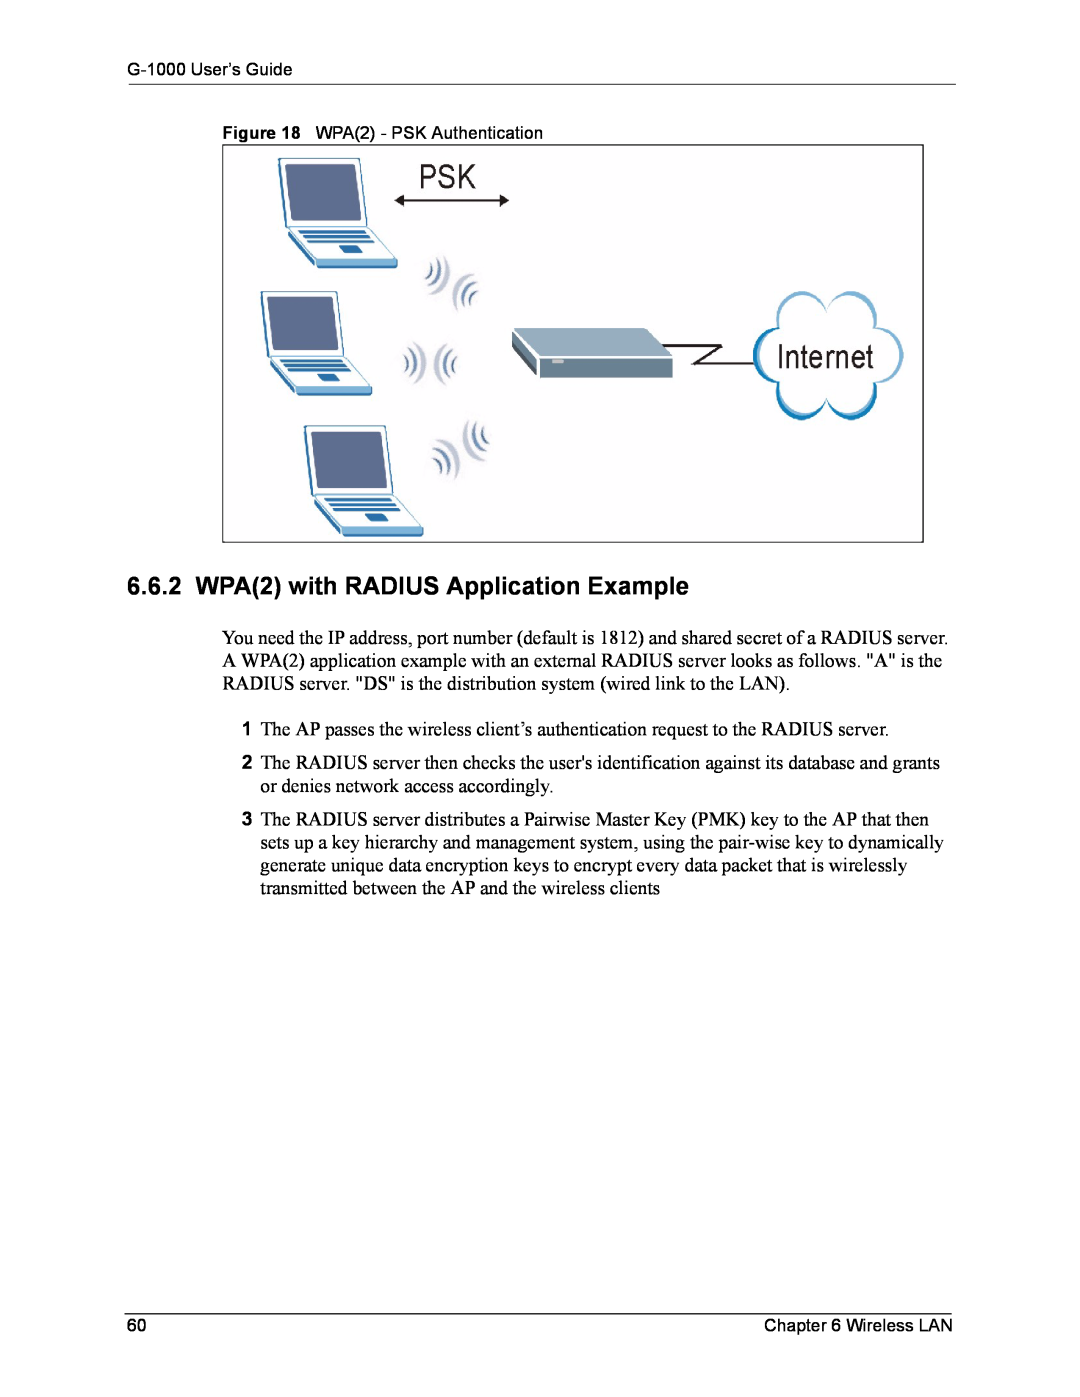 ZyXEL Communications G-1000 manual 6.6.2 WPA2 with RADIUS Application Example 